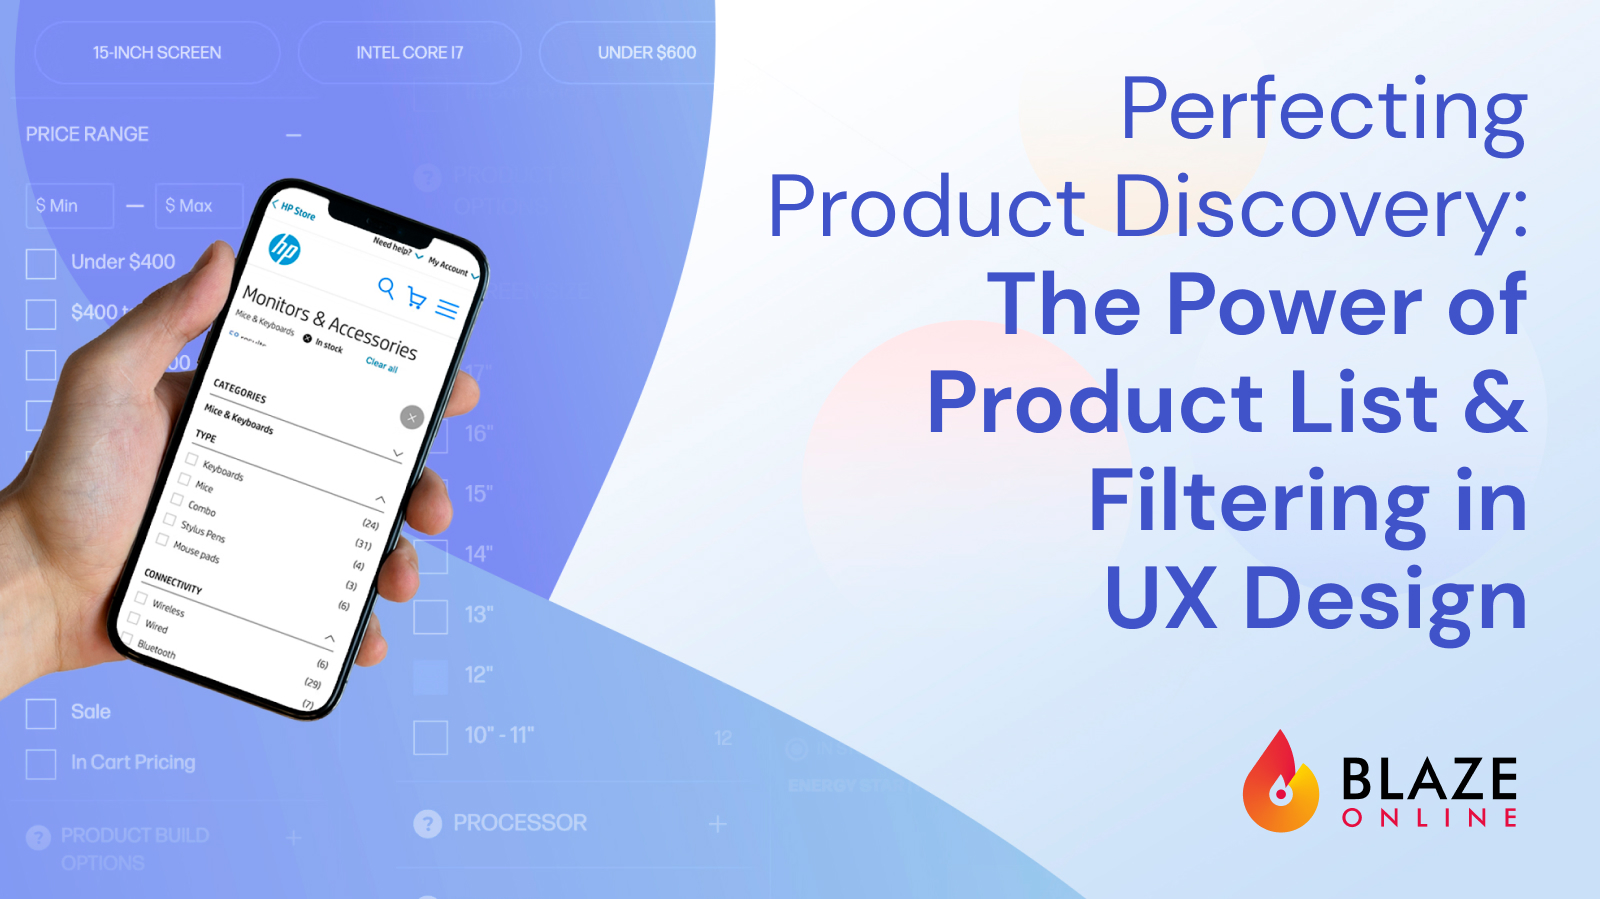 The Power of Product List & Filtering in UX Design